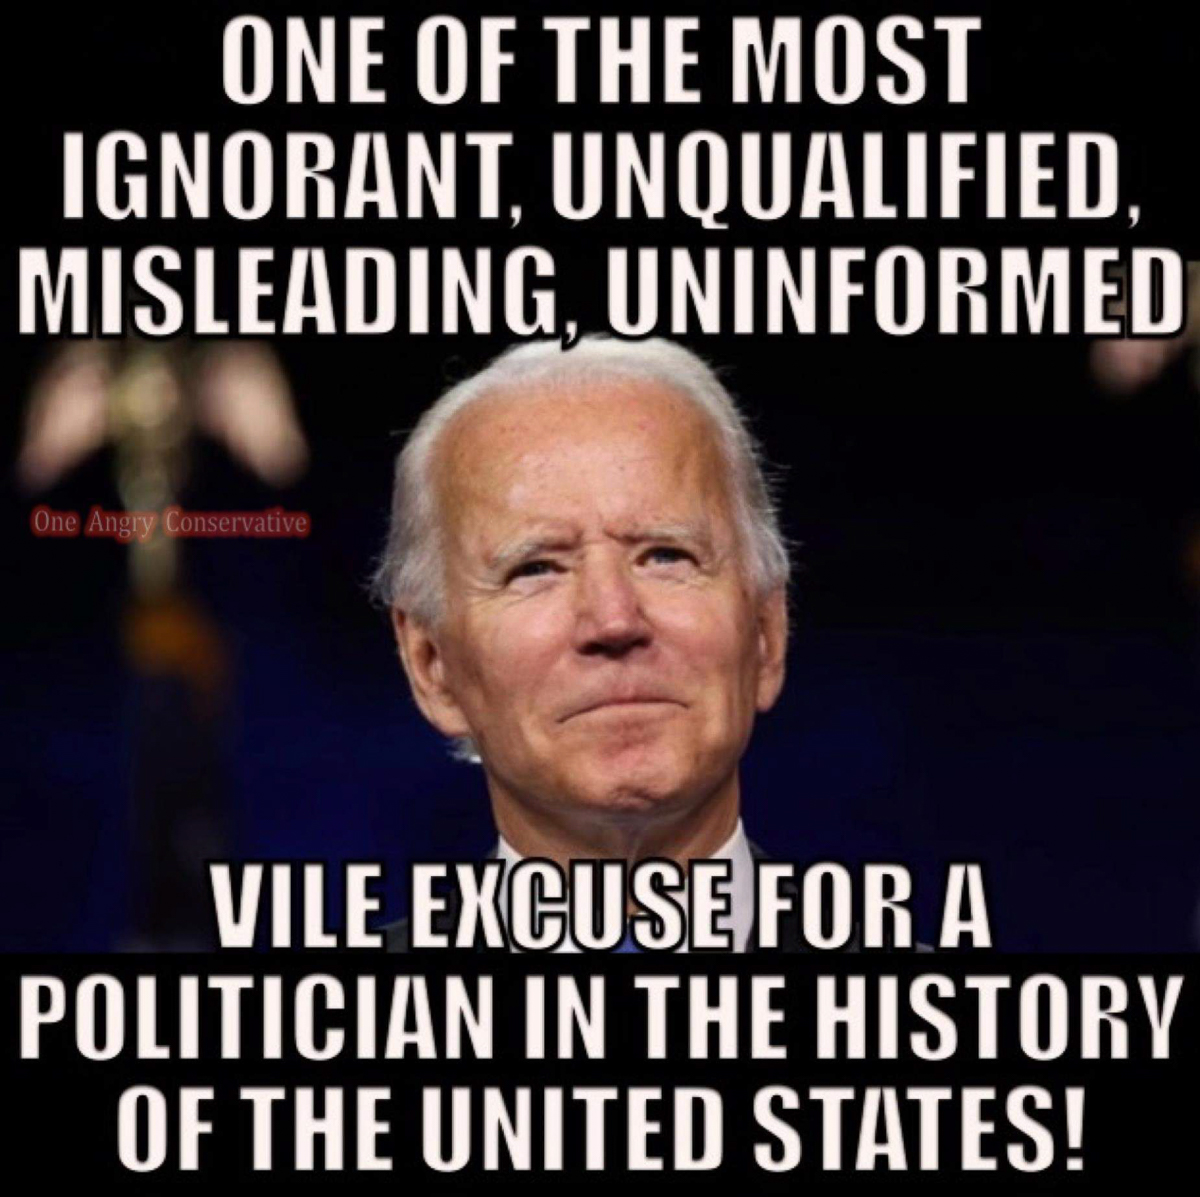 Igrnorant unqualified misleading uninformed politicians Biden the disaster  ~~  